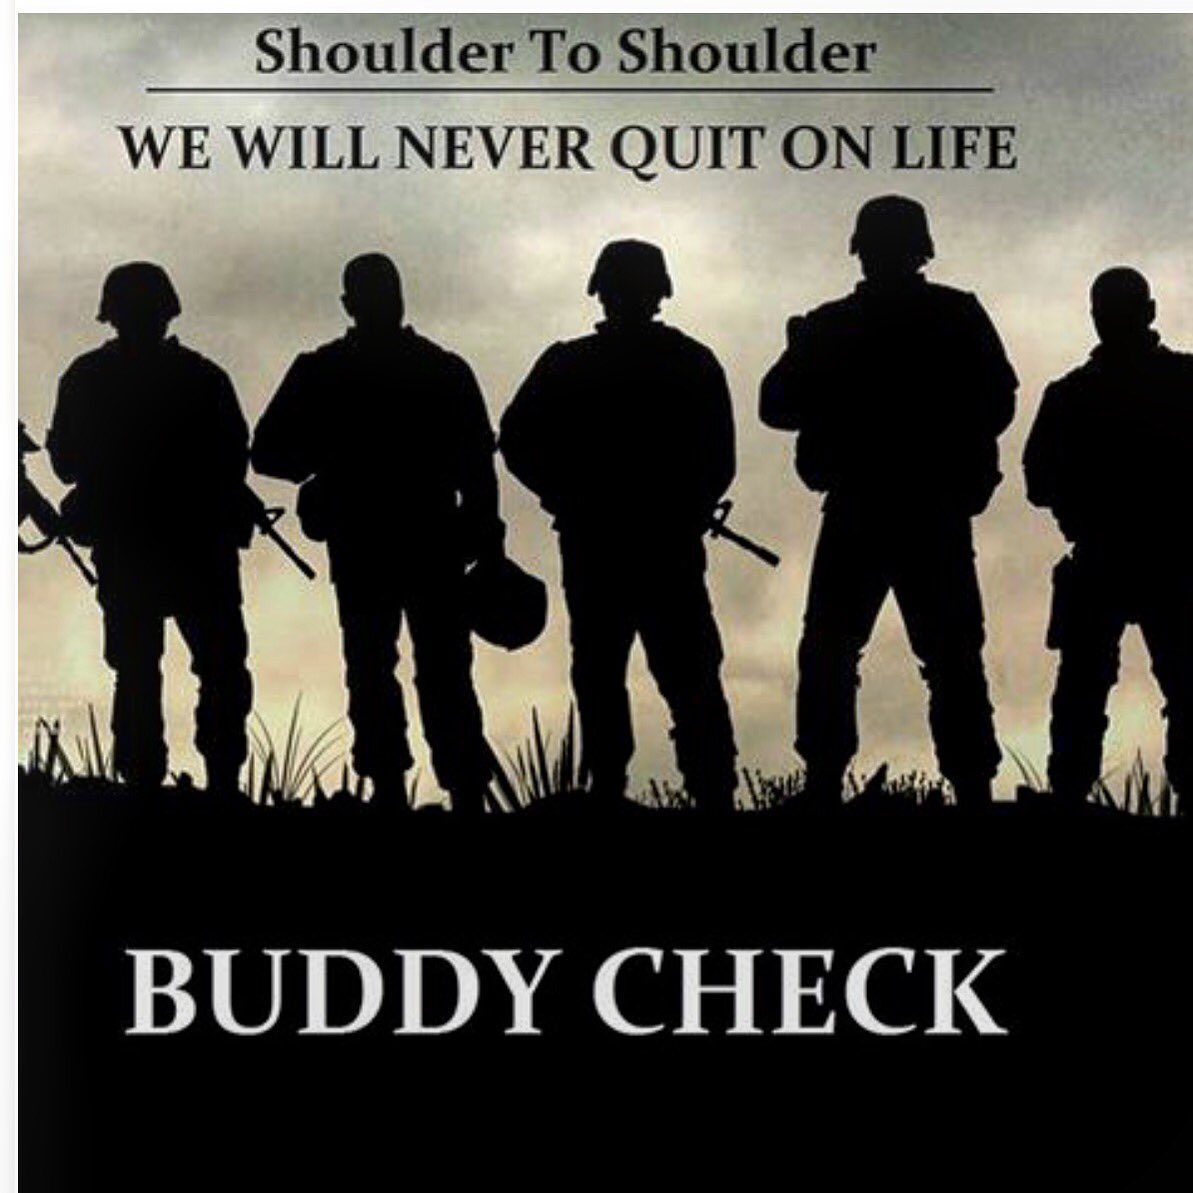 SATURDAY NIGHT BUDDY 🇺🇸CHECK🇺🇸 👉👉FOR💜VETERANS👈👈 (I don’t know if I can respond due to twitter issues today… but I need you to know that YOU ARE NOT FORGOTTEN)